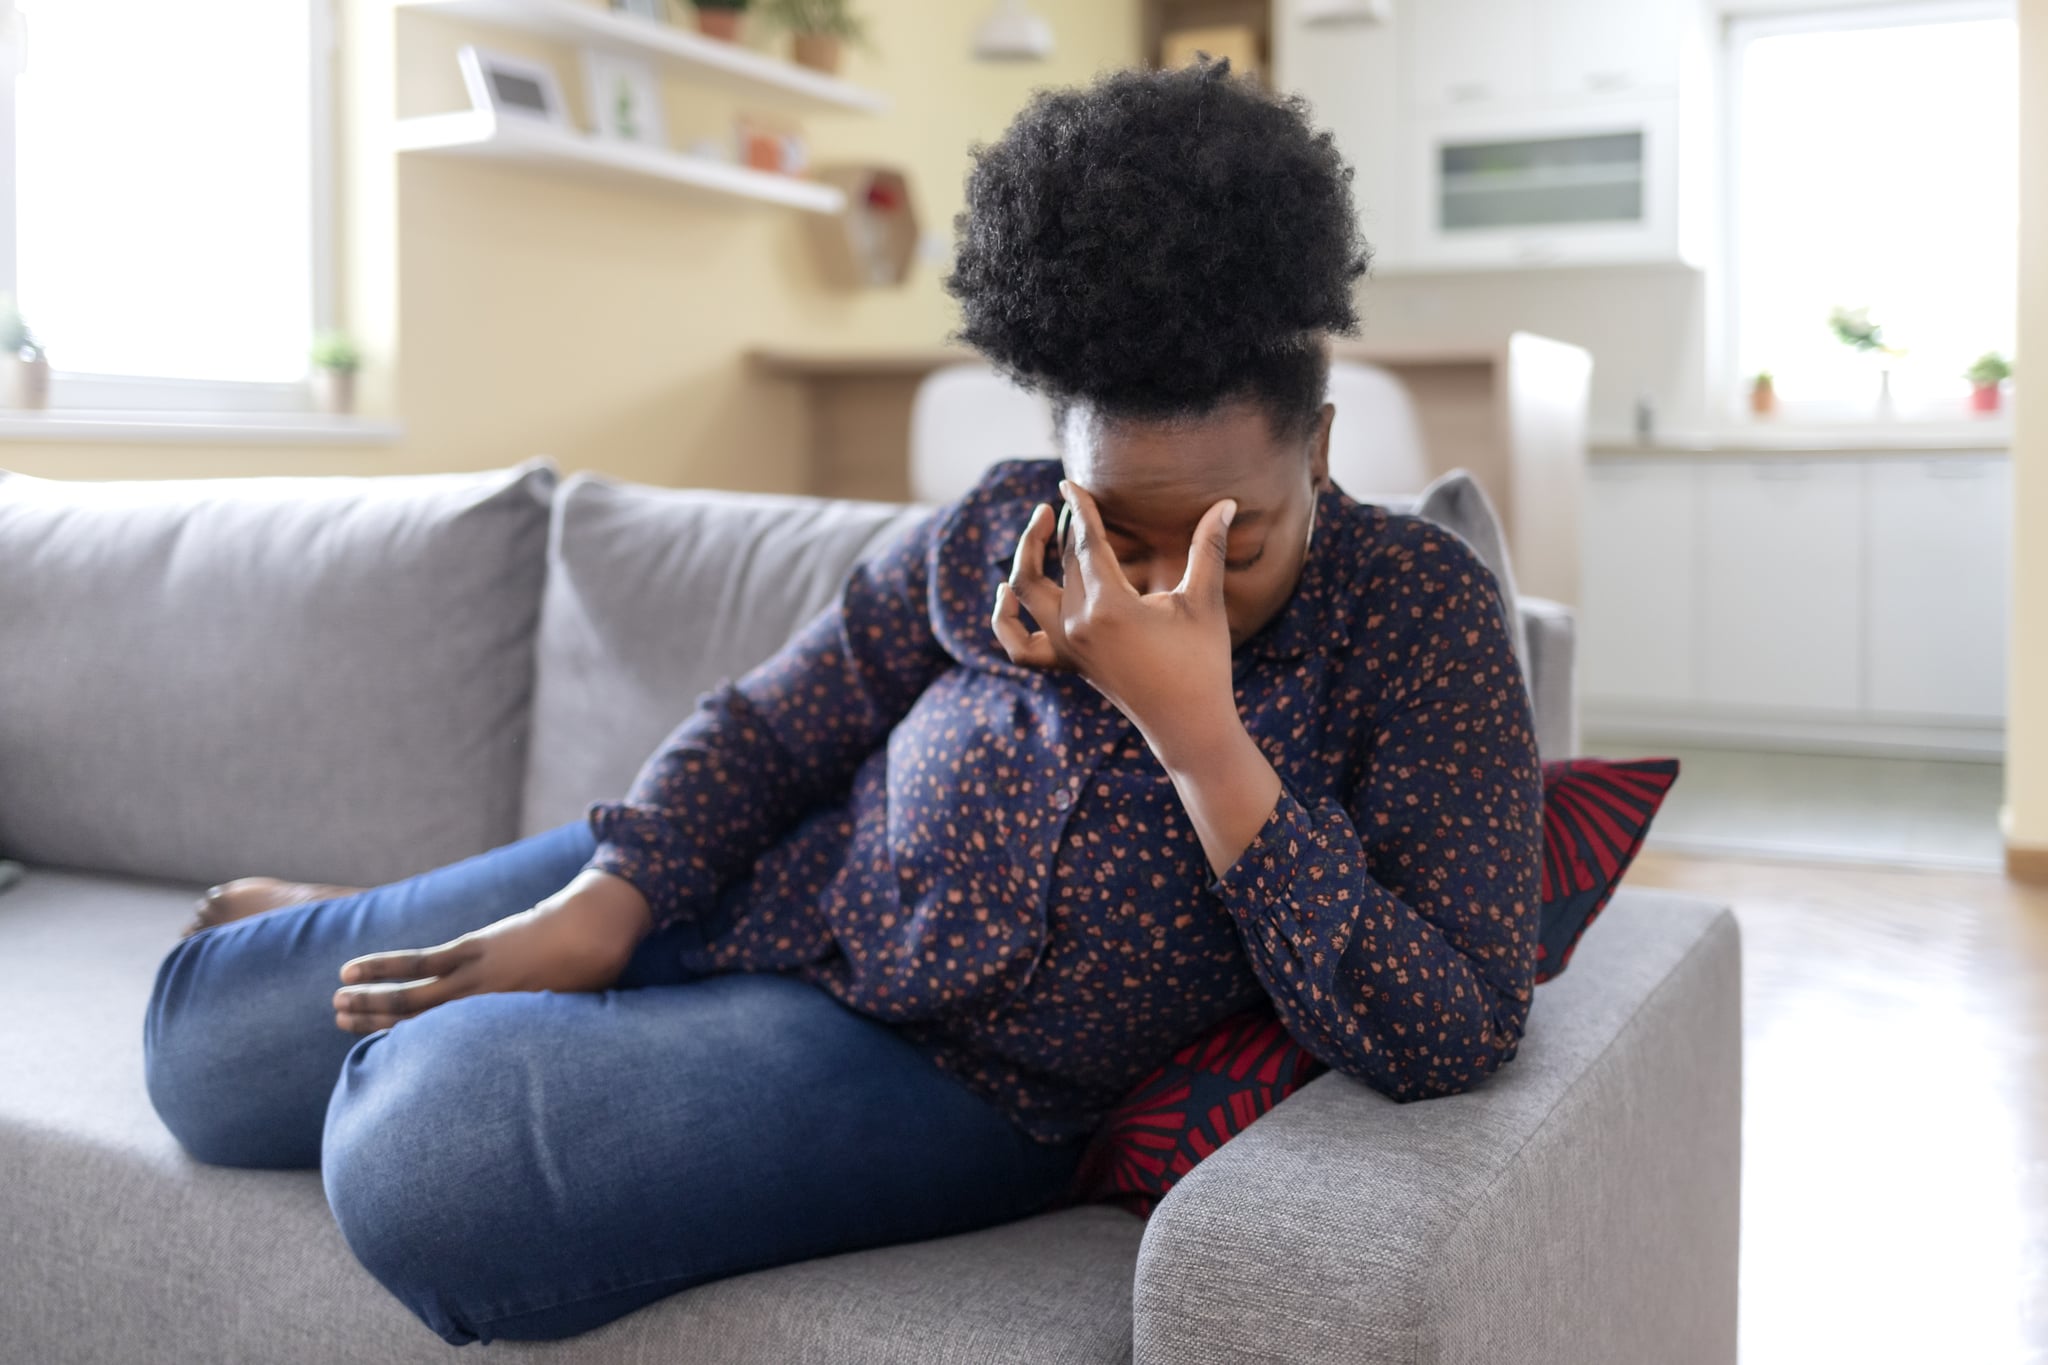 Young Black Woman Sitting on a Couch, Holding Her Head, Having a Strong Headache